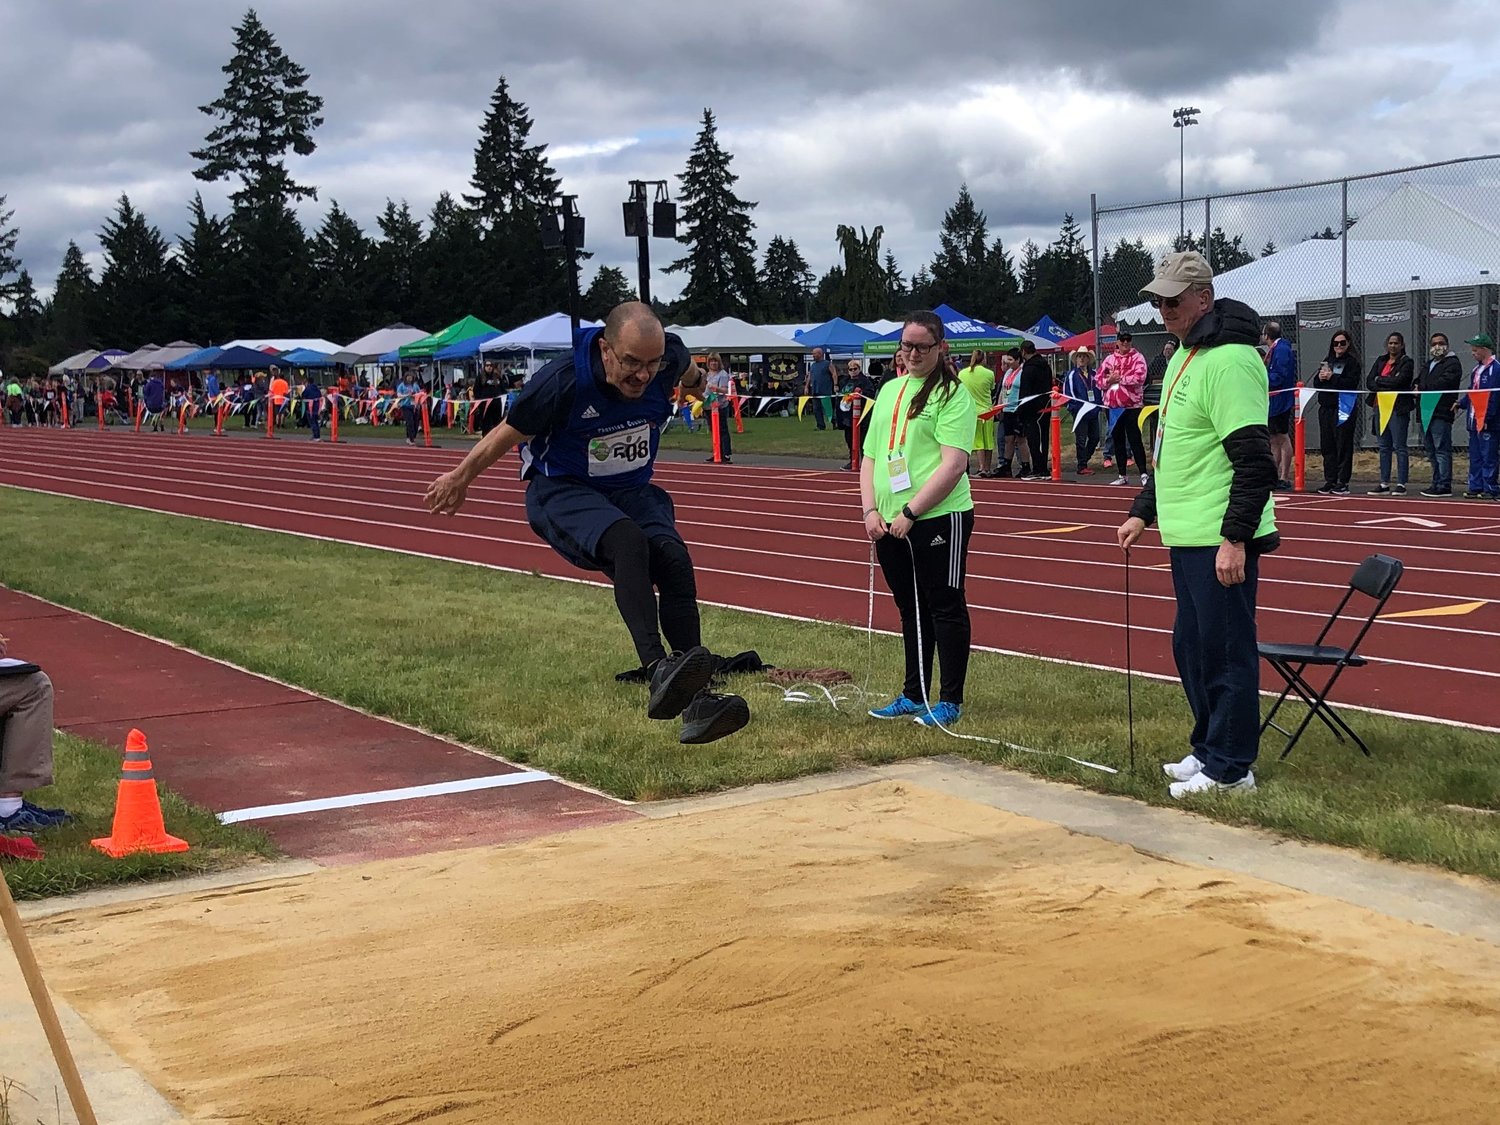 Bruce Voss is shown in mid-air during his final high jump at the Washington State Special Olympics Track and Field Games on Sunday, June 19, 2022.